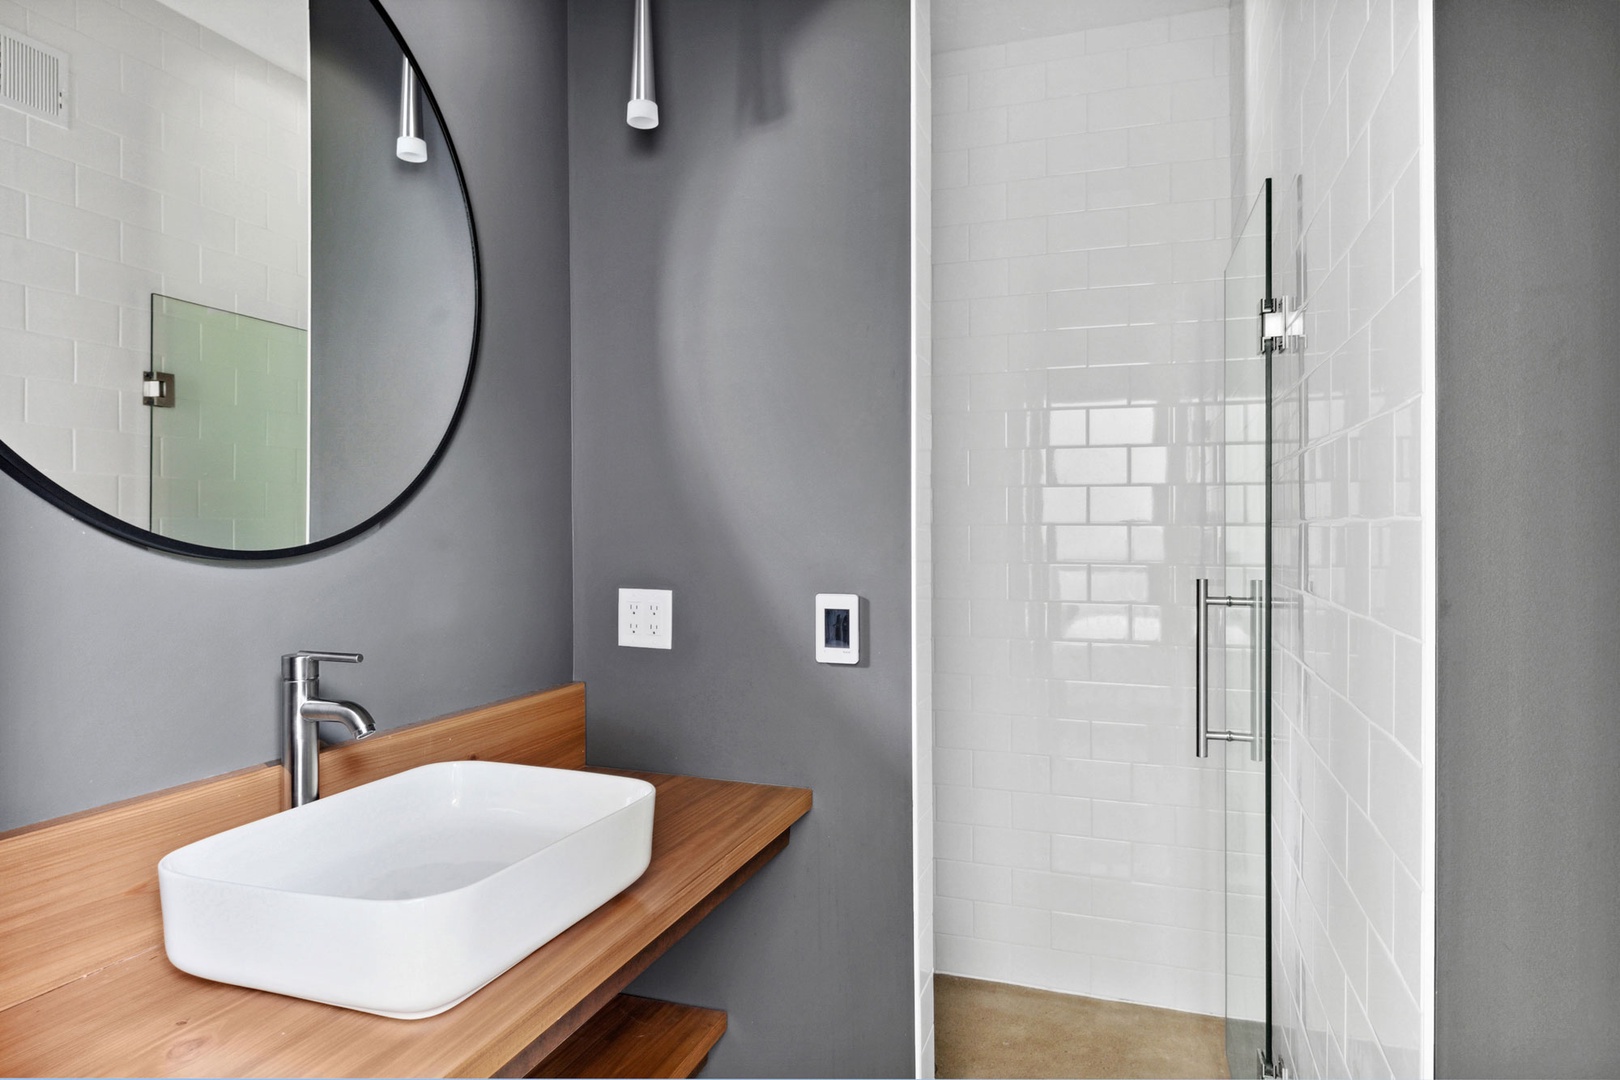 This sleek bathroom provides all the essentials for a hassle-free stay.